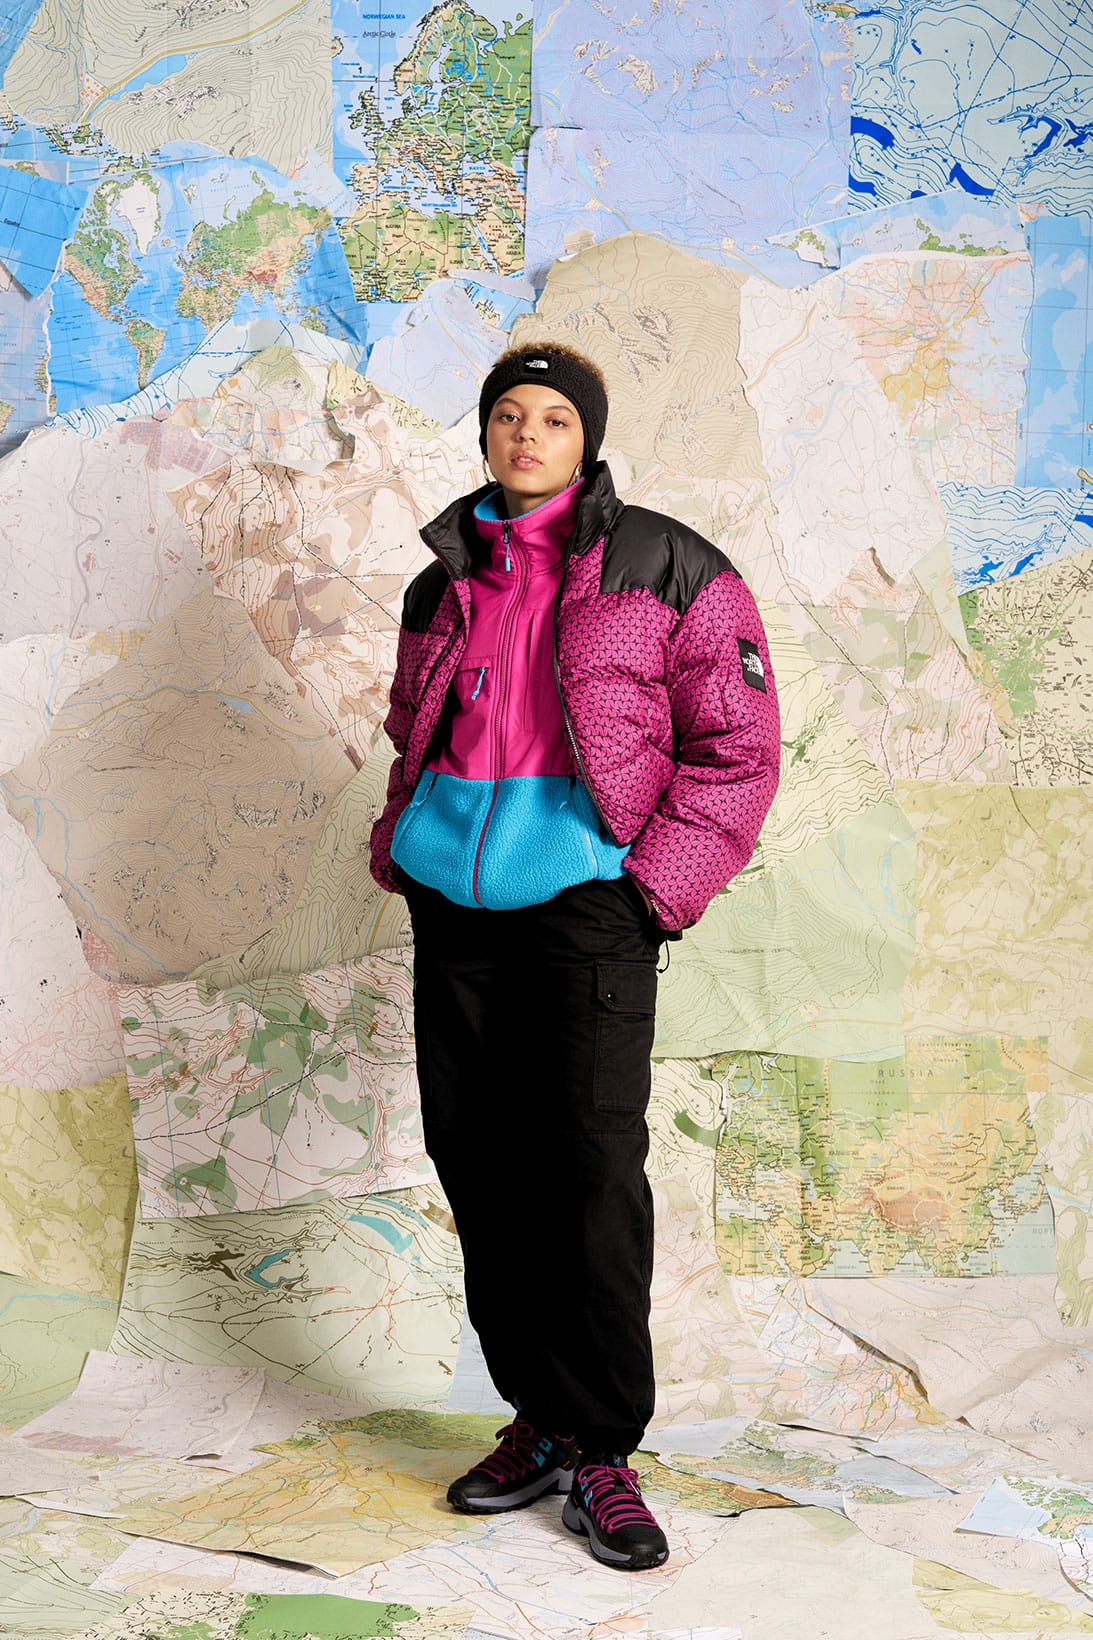 the north face 90s collection